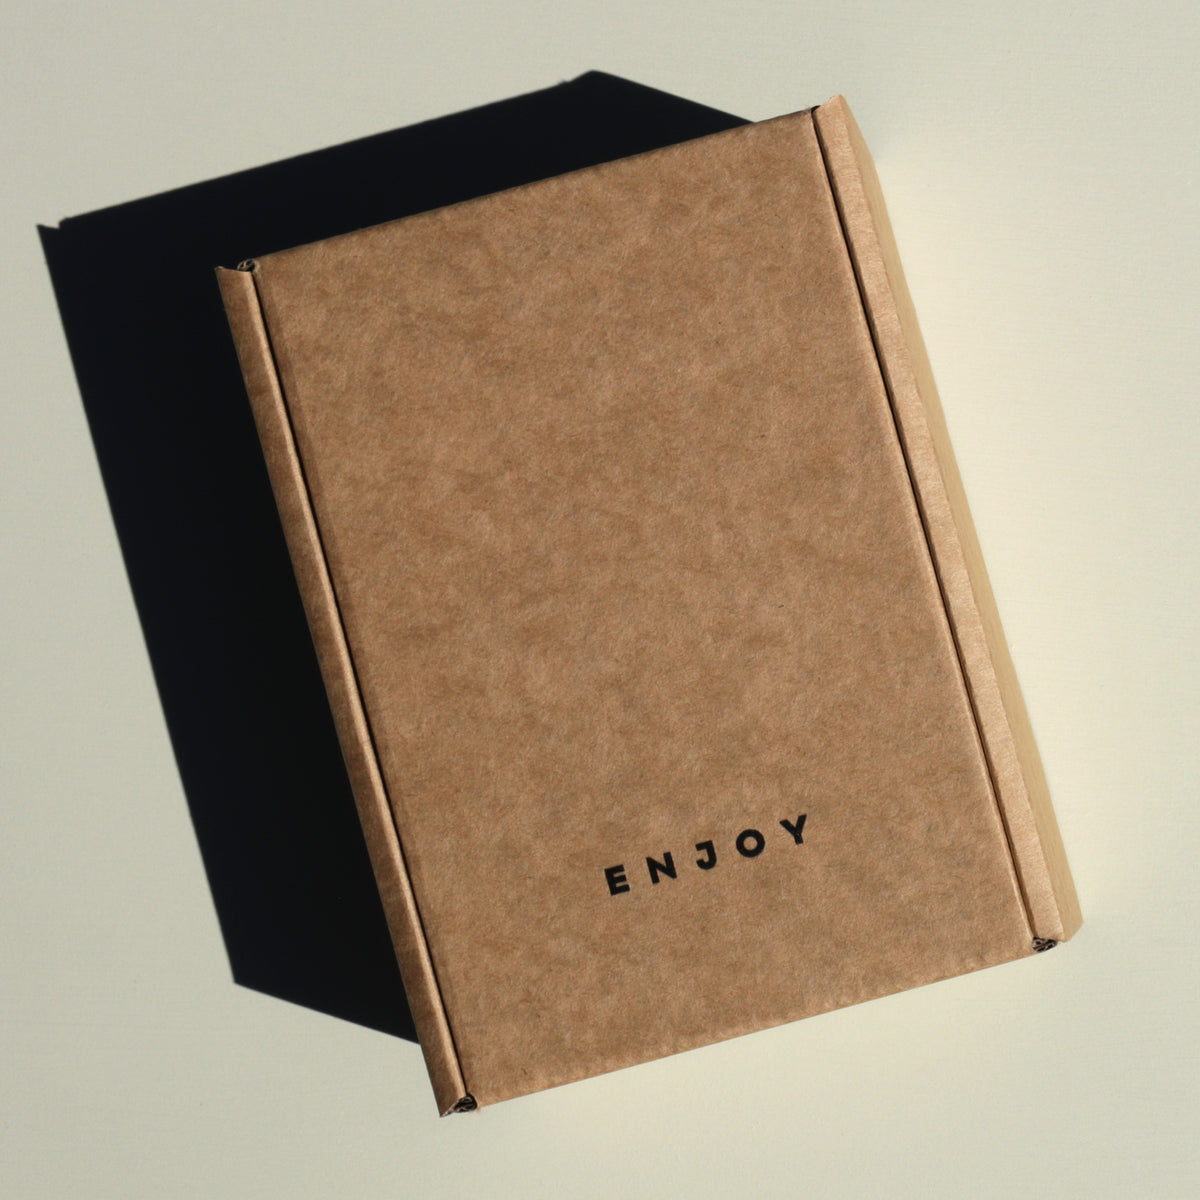 Recycled kraft paper box with text saying enjoy